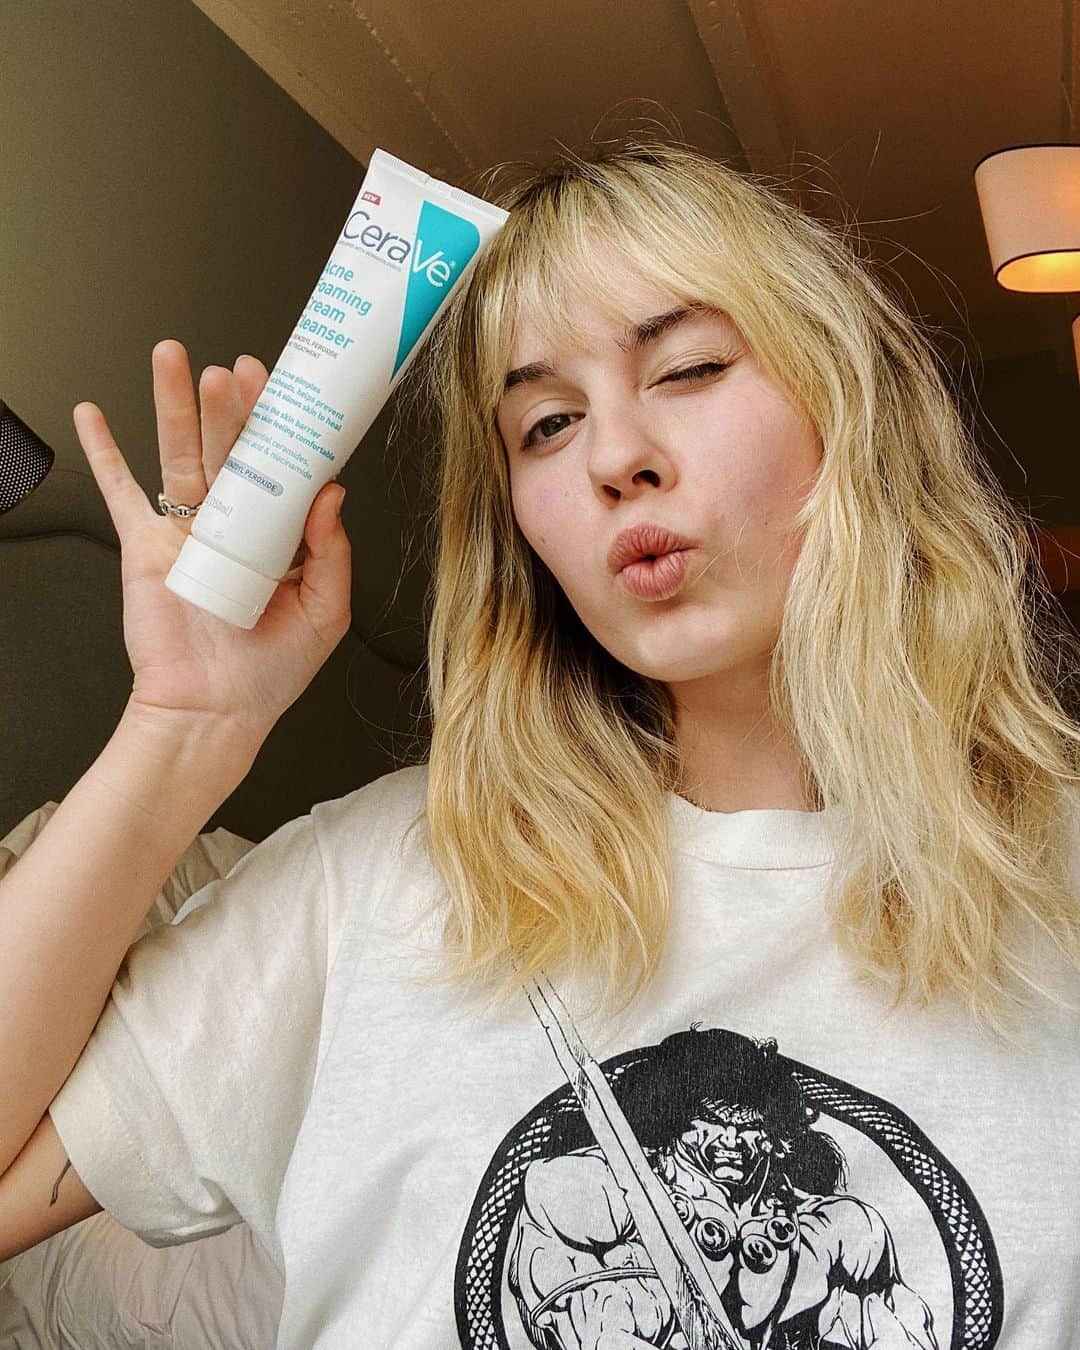 Arden Roseのインスタグラム：「#ad Been a big ole fan of @cerave for such a long time, so when they said they wanted to work with me I was like YES DUH. Their Moisturizing Cream was a godsend while I was on Accutane, and now that I’m maintaining my acne free skin (can’t believe I can even type that sentence) I’ve been loving their line of acne products, including the Acne Foaming Cream Cleanser. It has three essential ceramides to maintain the protective skin barrier and amazing acne fighting ingredients like 4% Benzoyl Peroxide that works wonders to help clear acne and prevent new acne, without stripping my skin of its moisture! I also have been loving their Resurfacing Retinol Serum which helps reduce the appearance of post-acne marks and pores. #CeraVePartner」